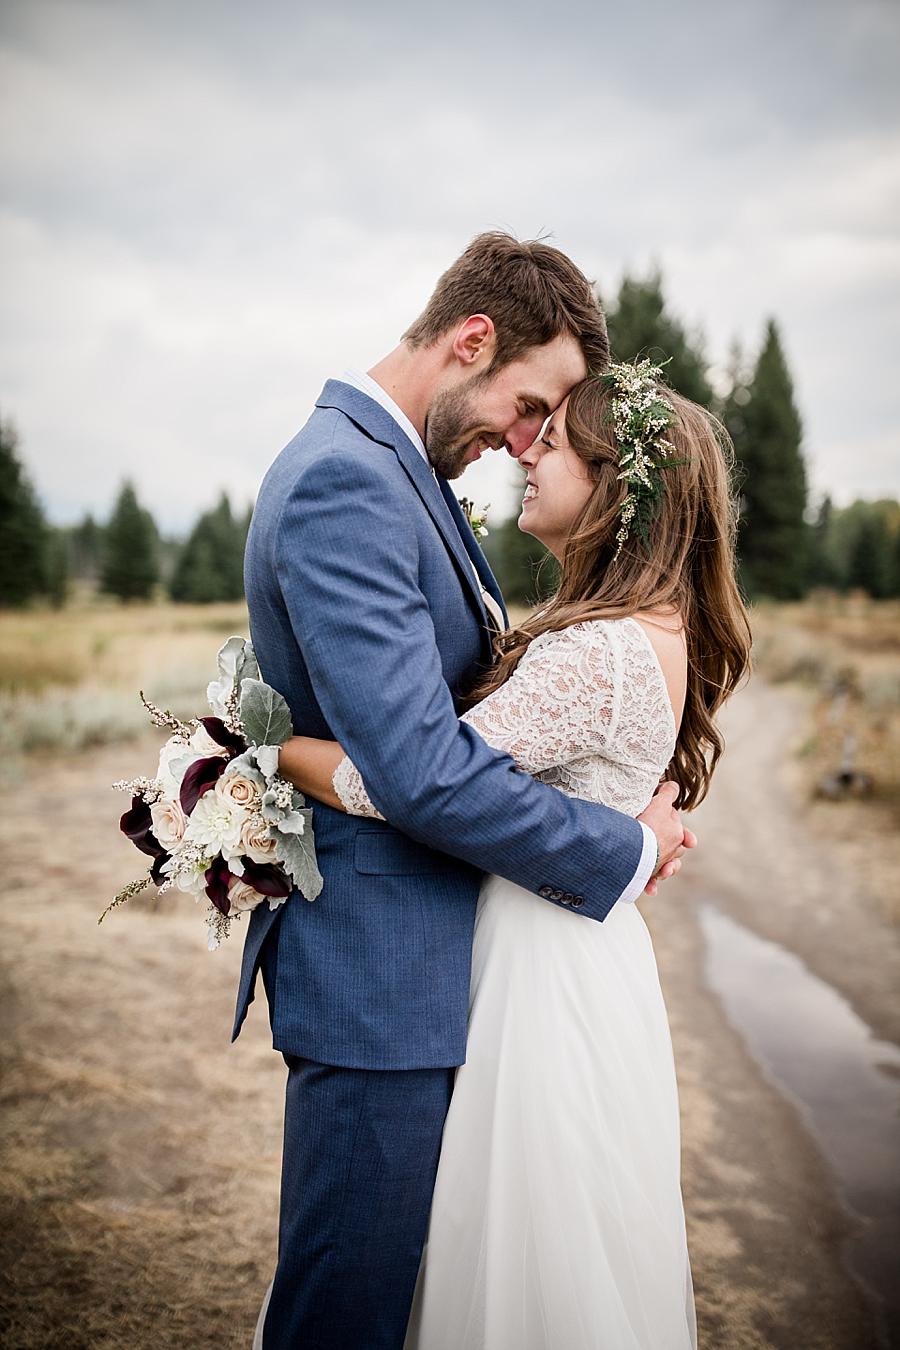 Foreheads touching at this Grand Tetons Destination Wedding by Knoxville Wedding Photographer, Amanda May Photos.